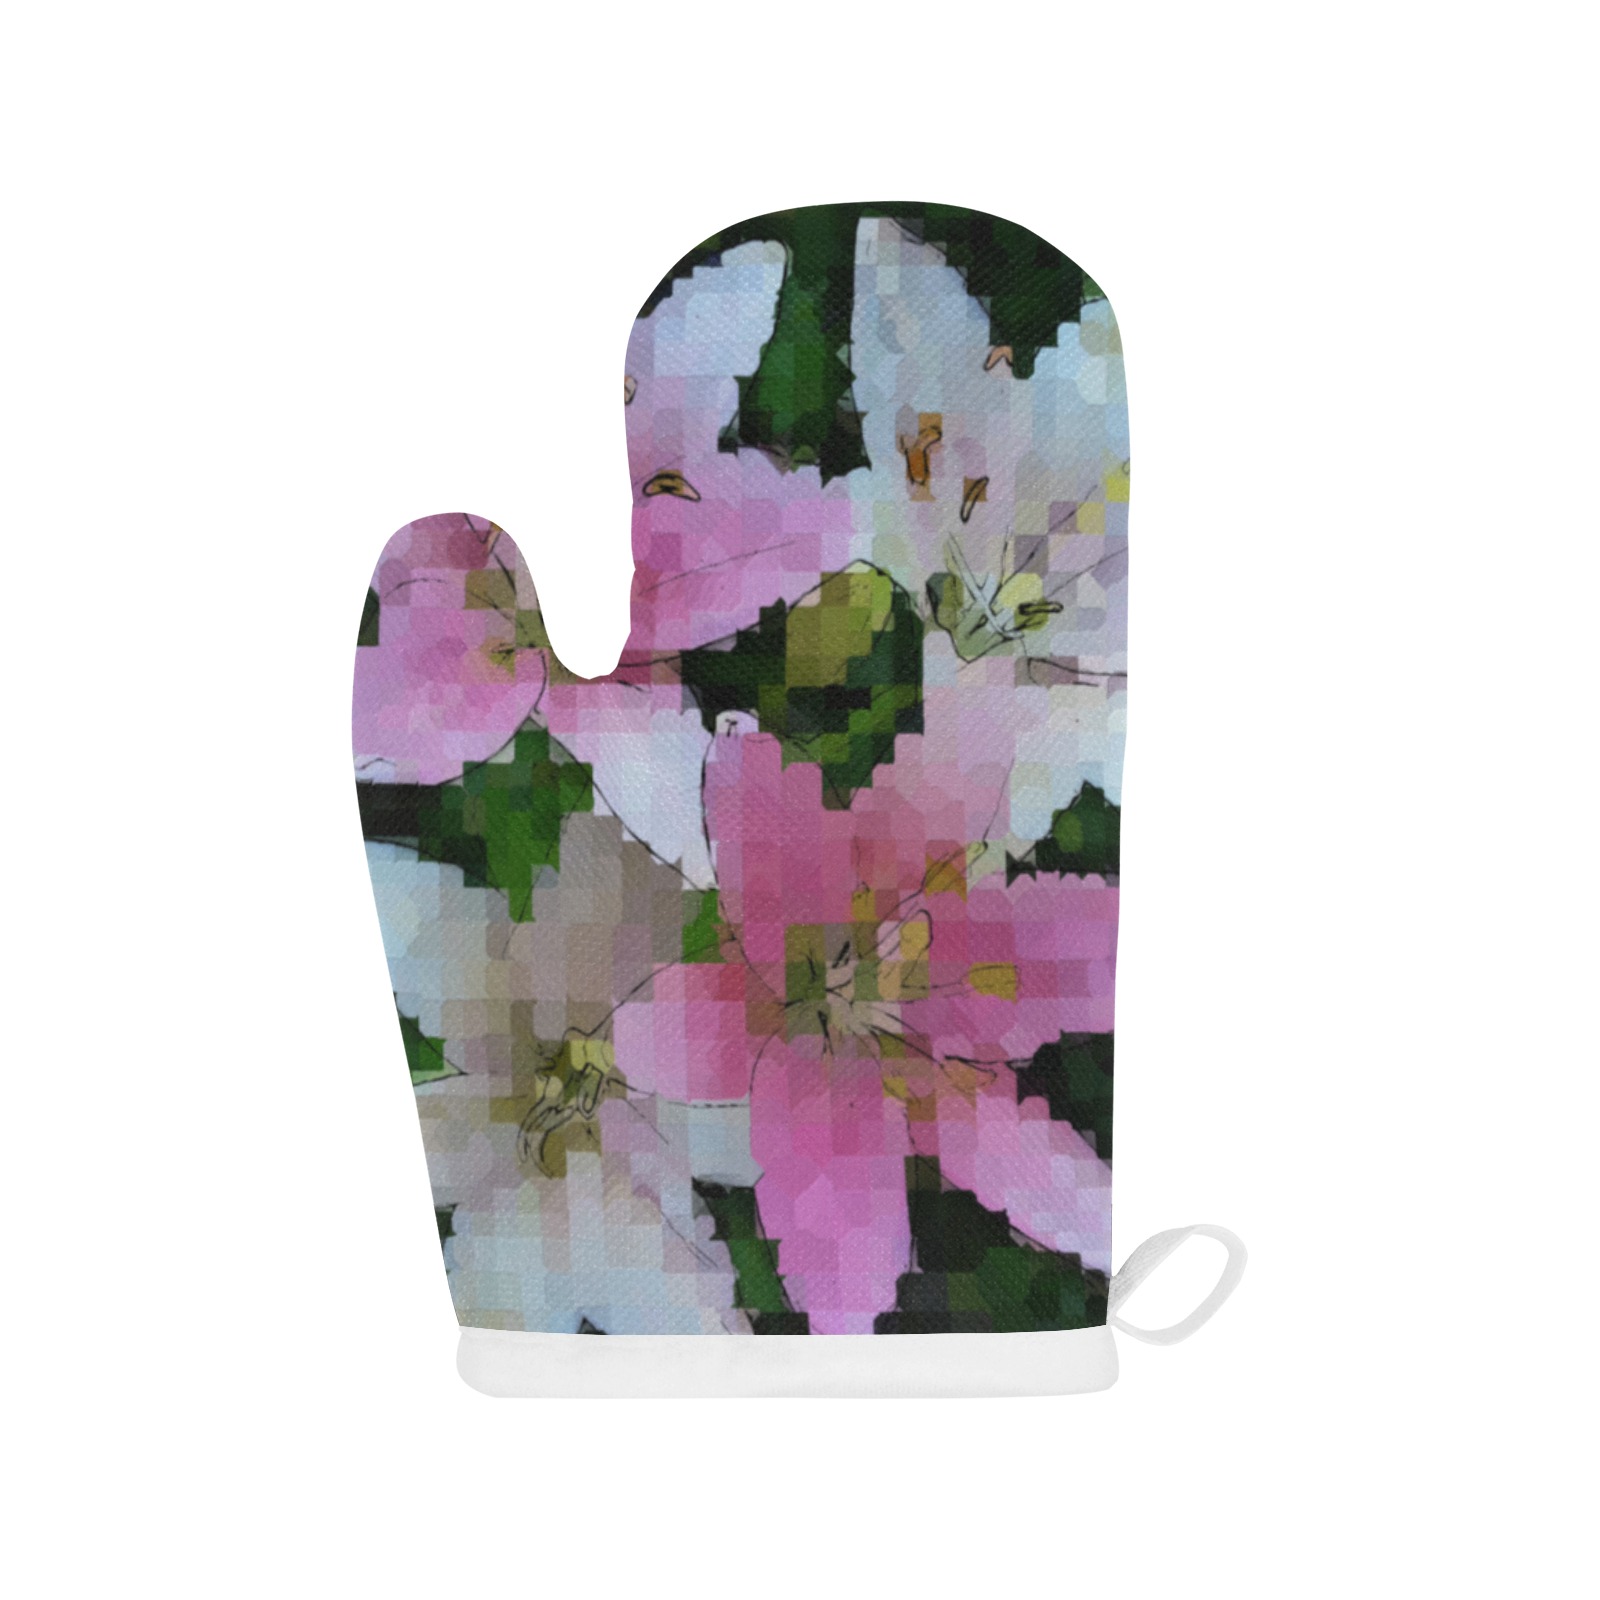 Mosaic of Pink and White Lilies Linen Oven Mitt (One Piece)